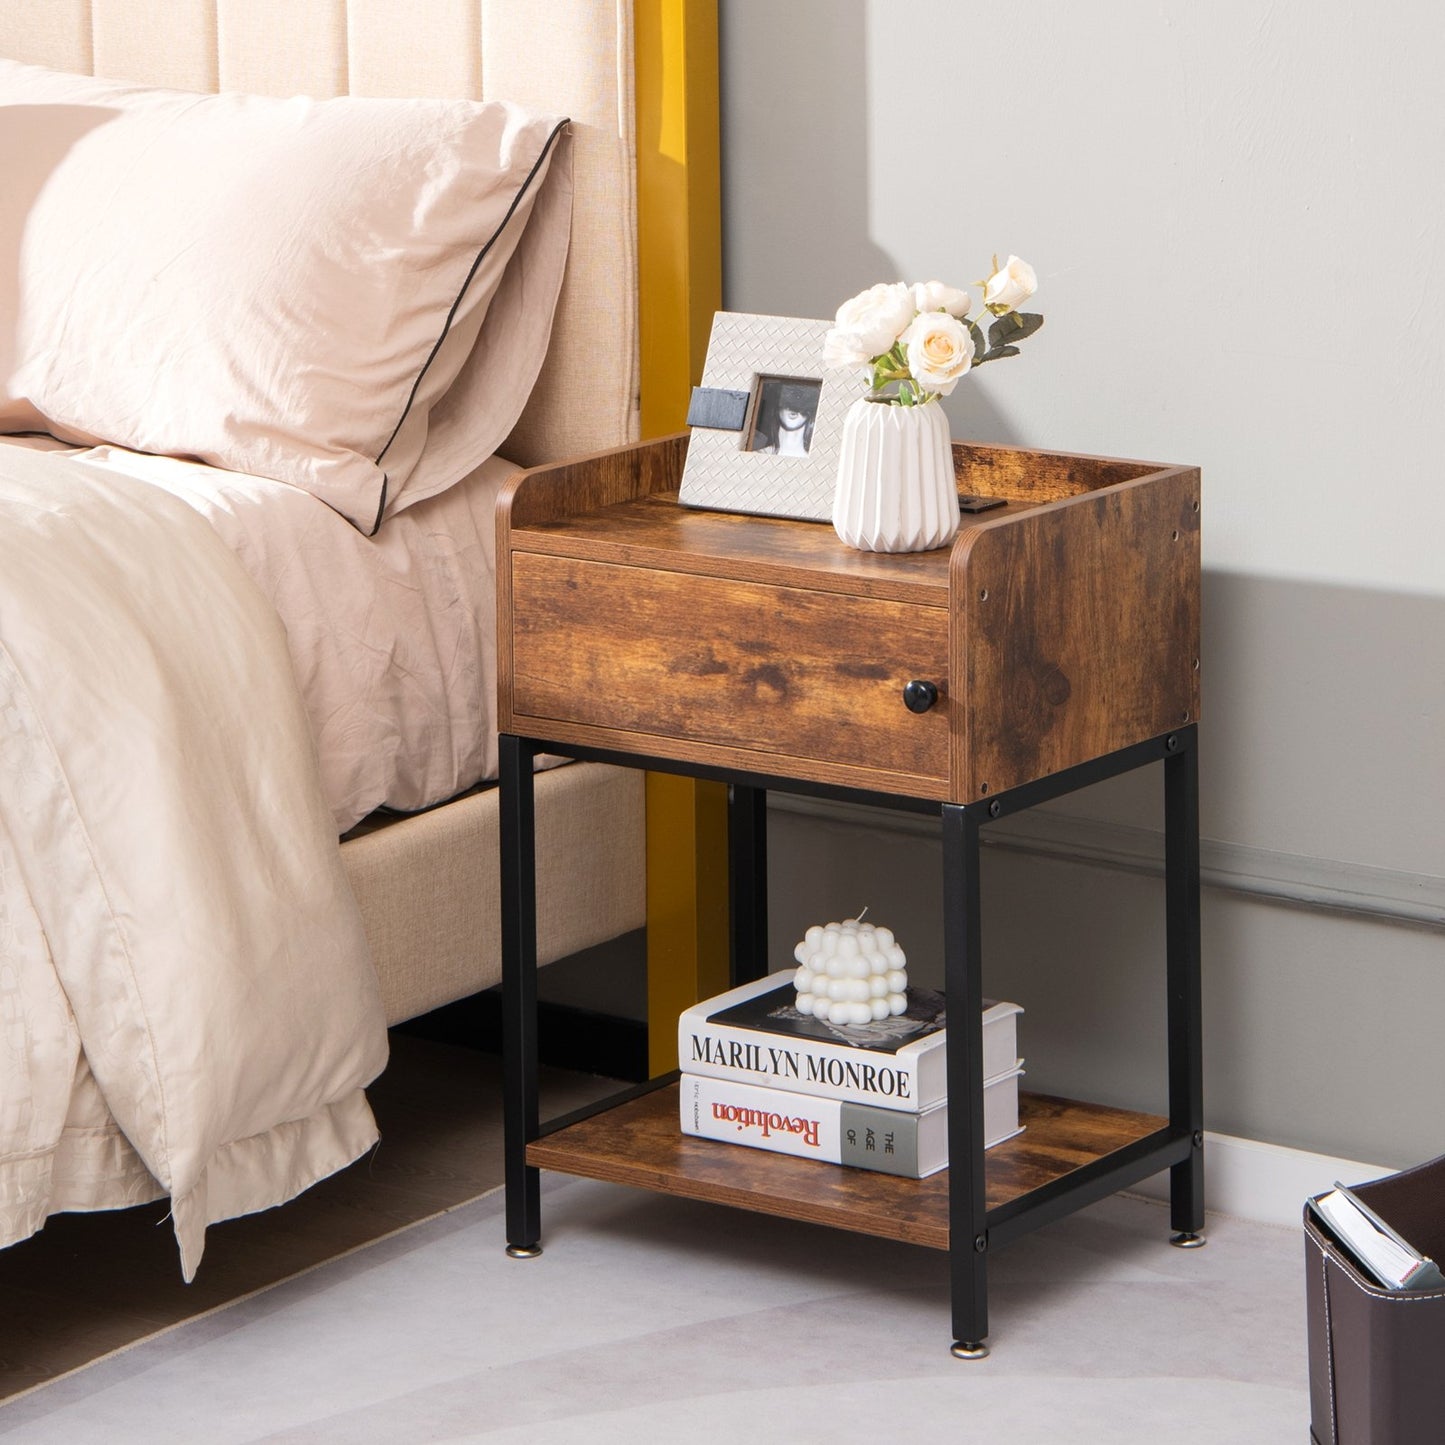 Lift Top End Table with Charging Station and Storage Shelves, Coffee